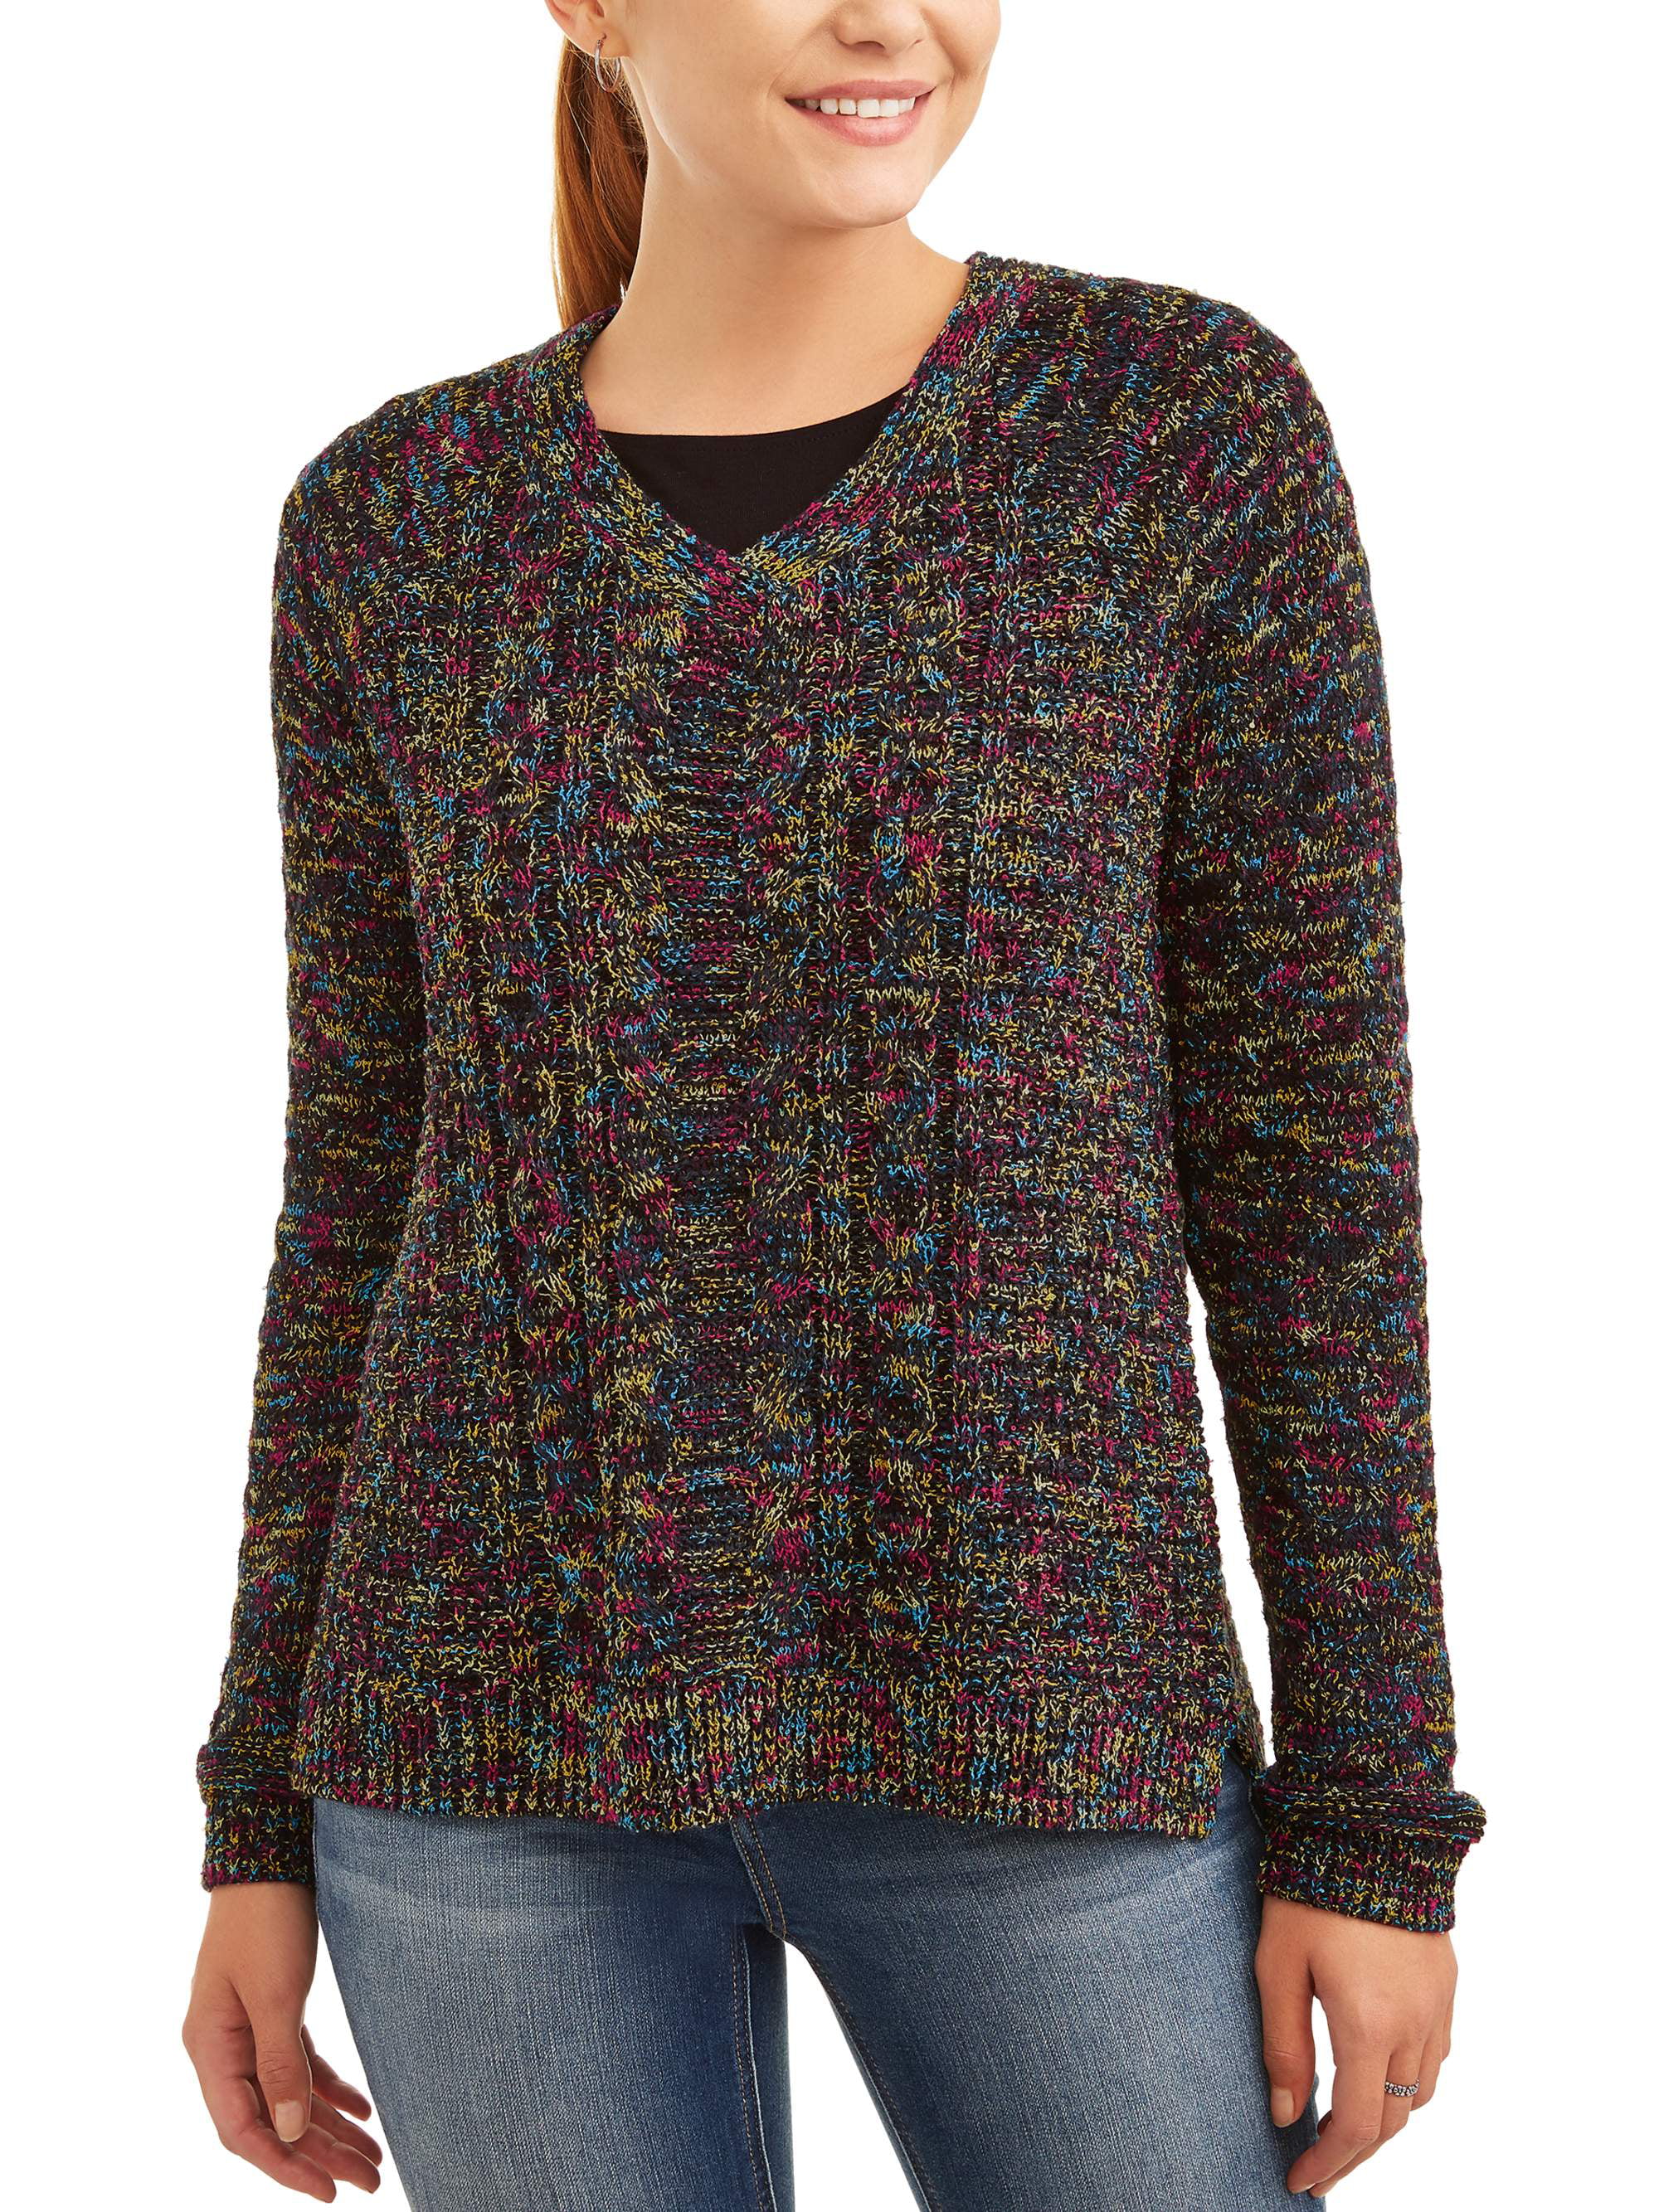 Time and Tru - Time and Tru Women's V-neck Boucle Sweater - Walmart.com ...